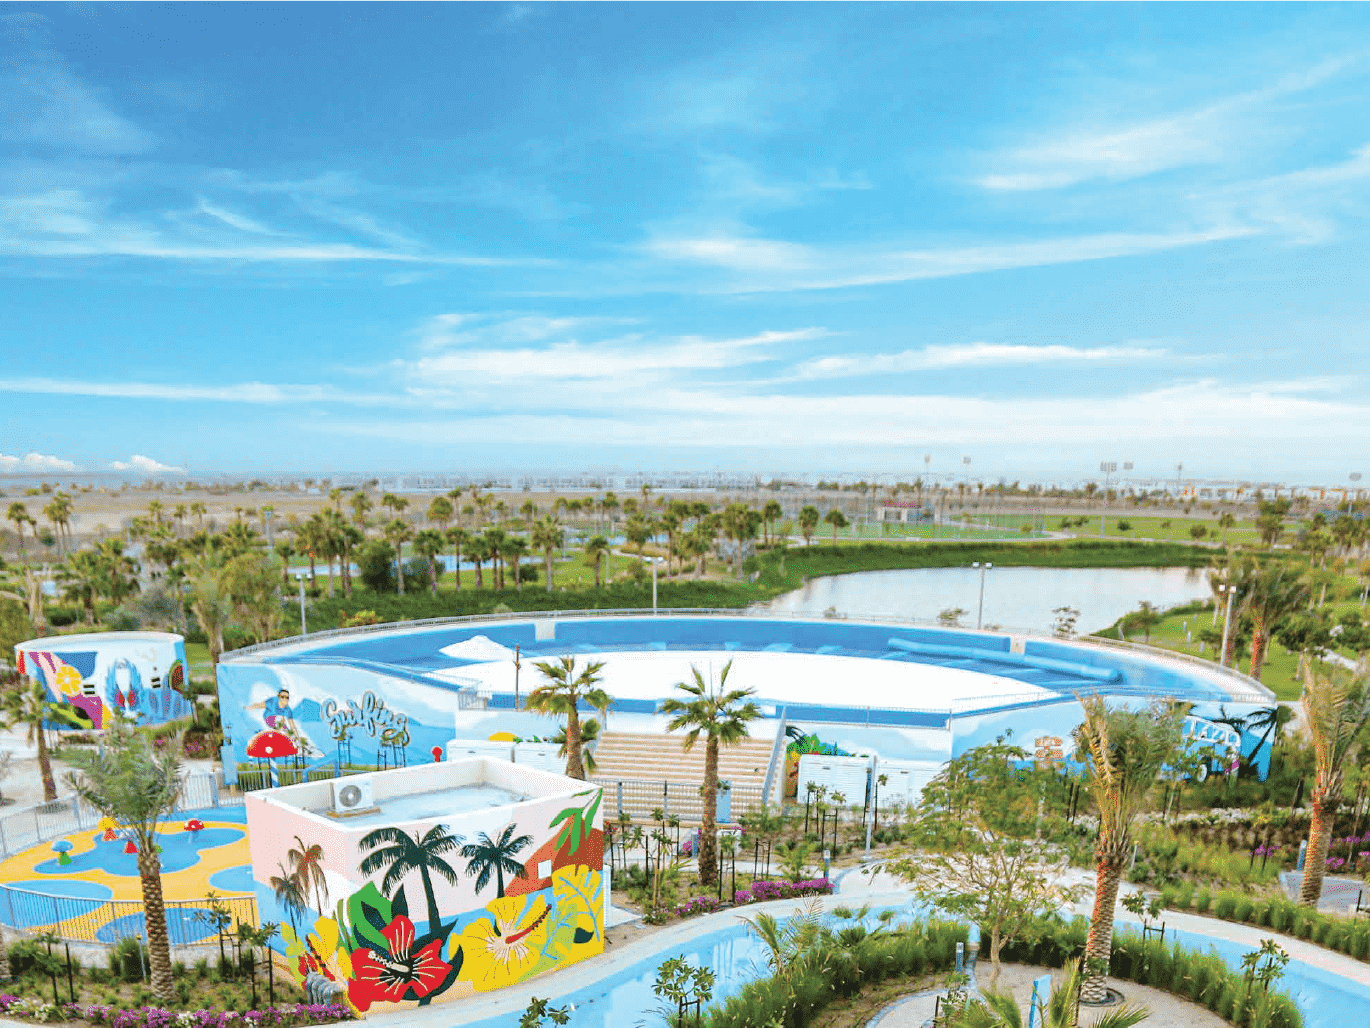 The image shows the Malibu Bay artificial beach, the lazy river, the wave surfing pool, and the floating pool.